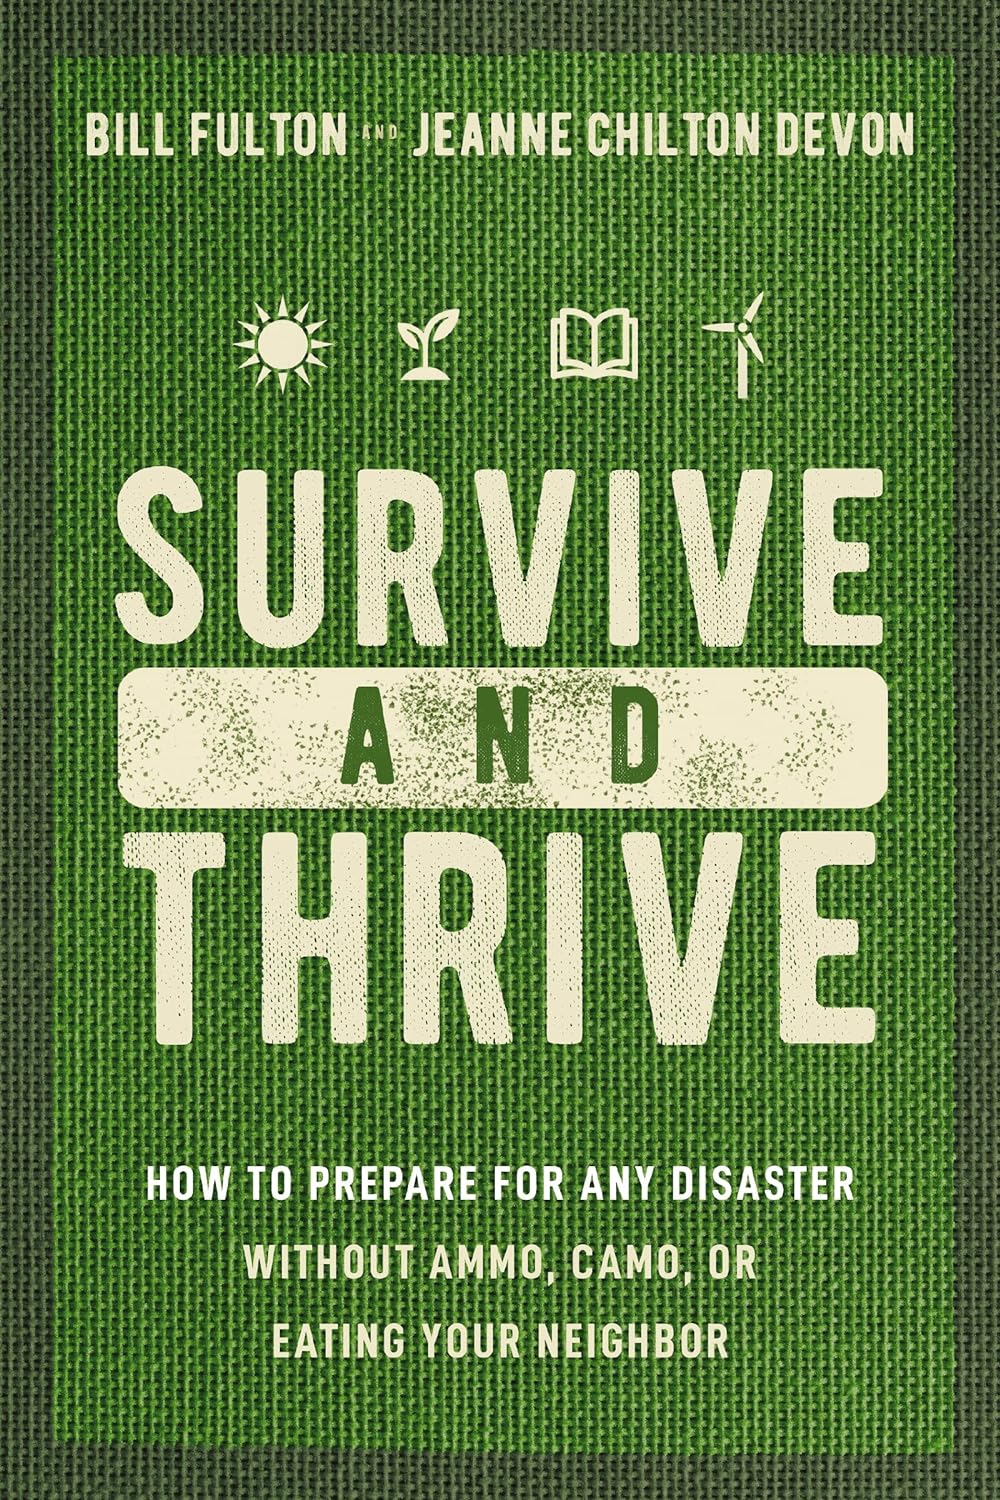 Survive and Thrive: How To Prepare for Any Disaster Without Ammo, Camo, or Eating Your Neighbor